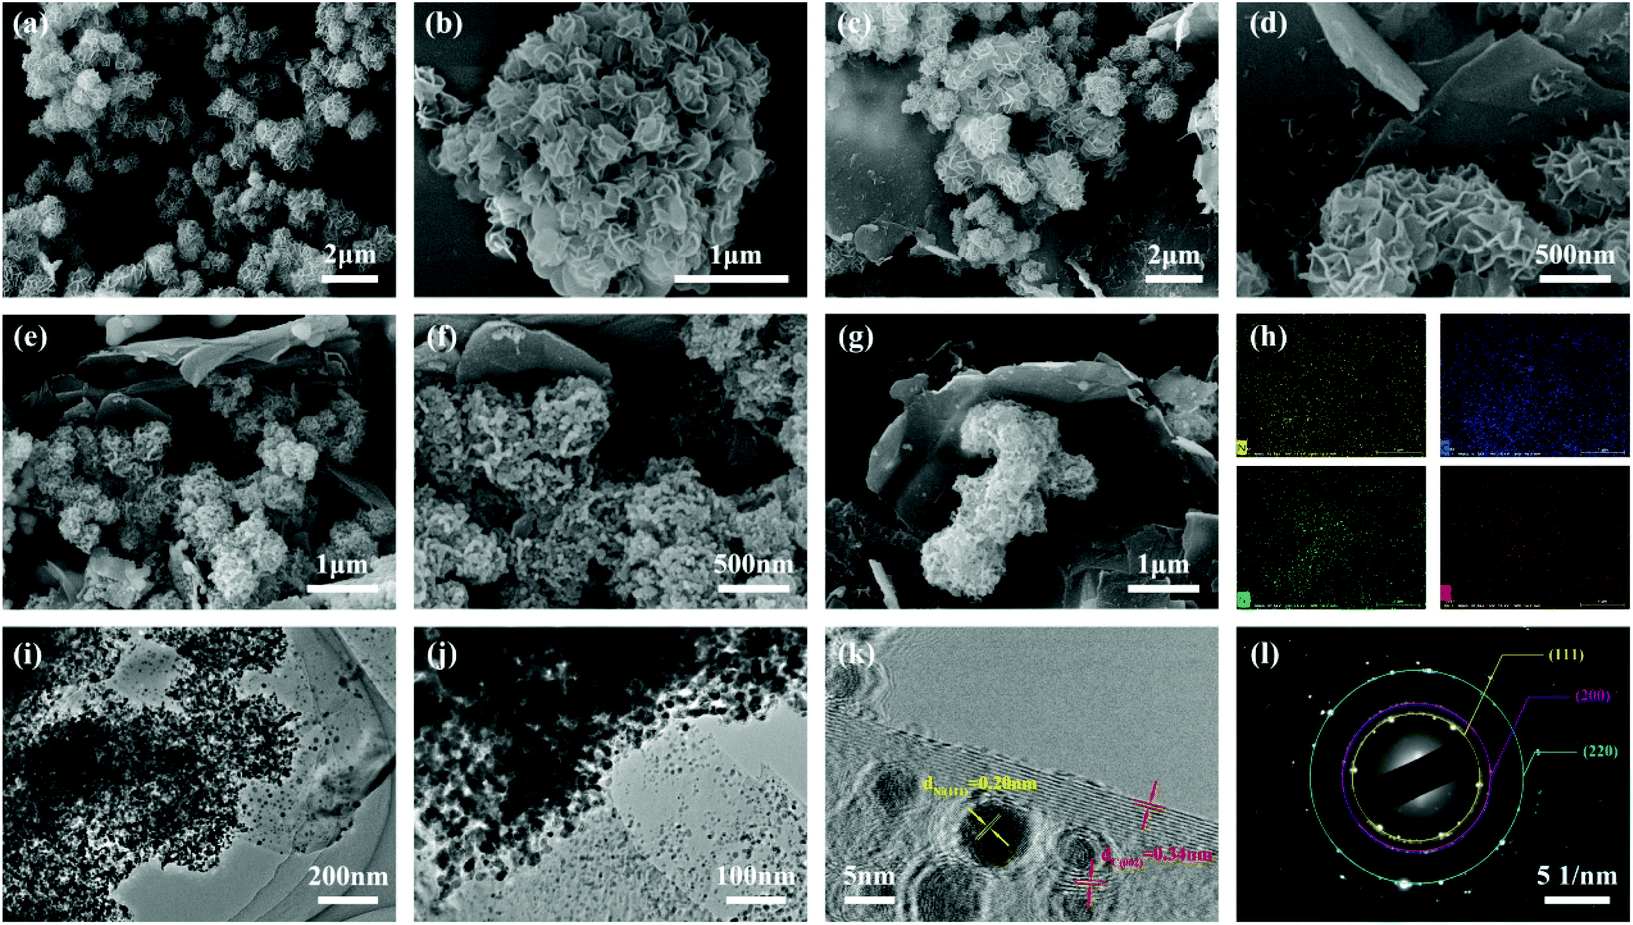 Facile Synthesis Of 3d Ni C Nanocomposites Derived From Two Kinds Of Petal Like Ni Based Mofs Towards Lightweight And Efficient Microwave Absorbers Nanoscale Rsc Publishing Doi 10 1039 D0nrj